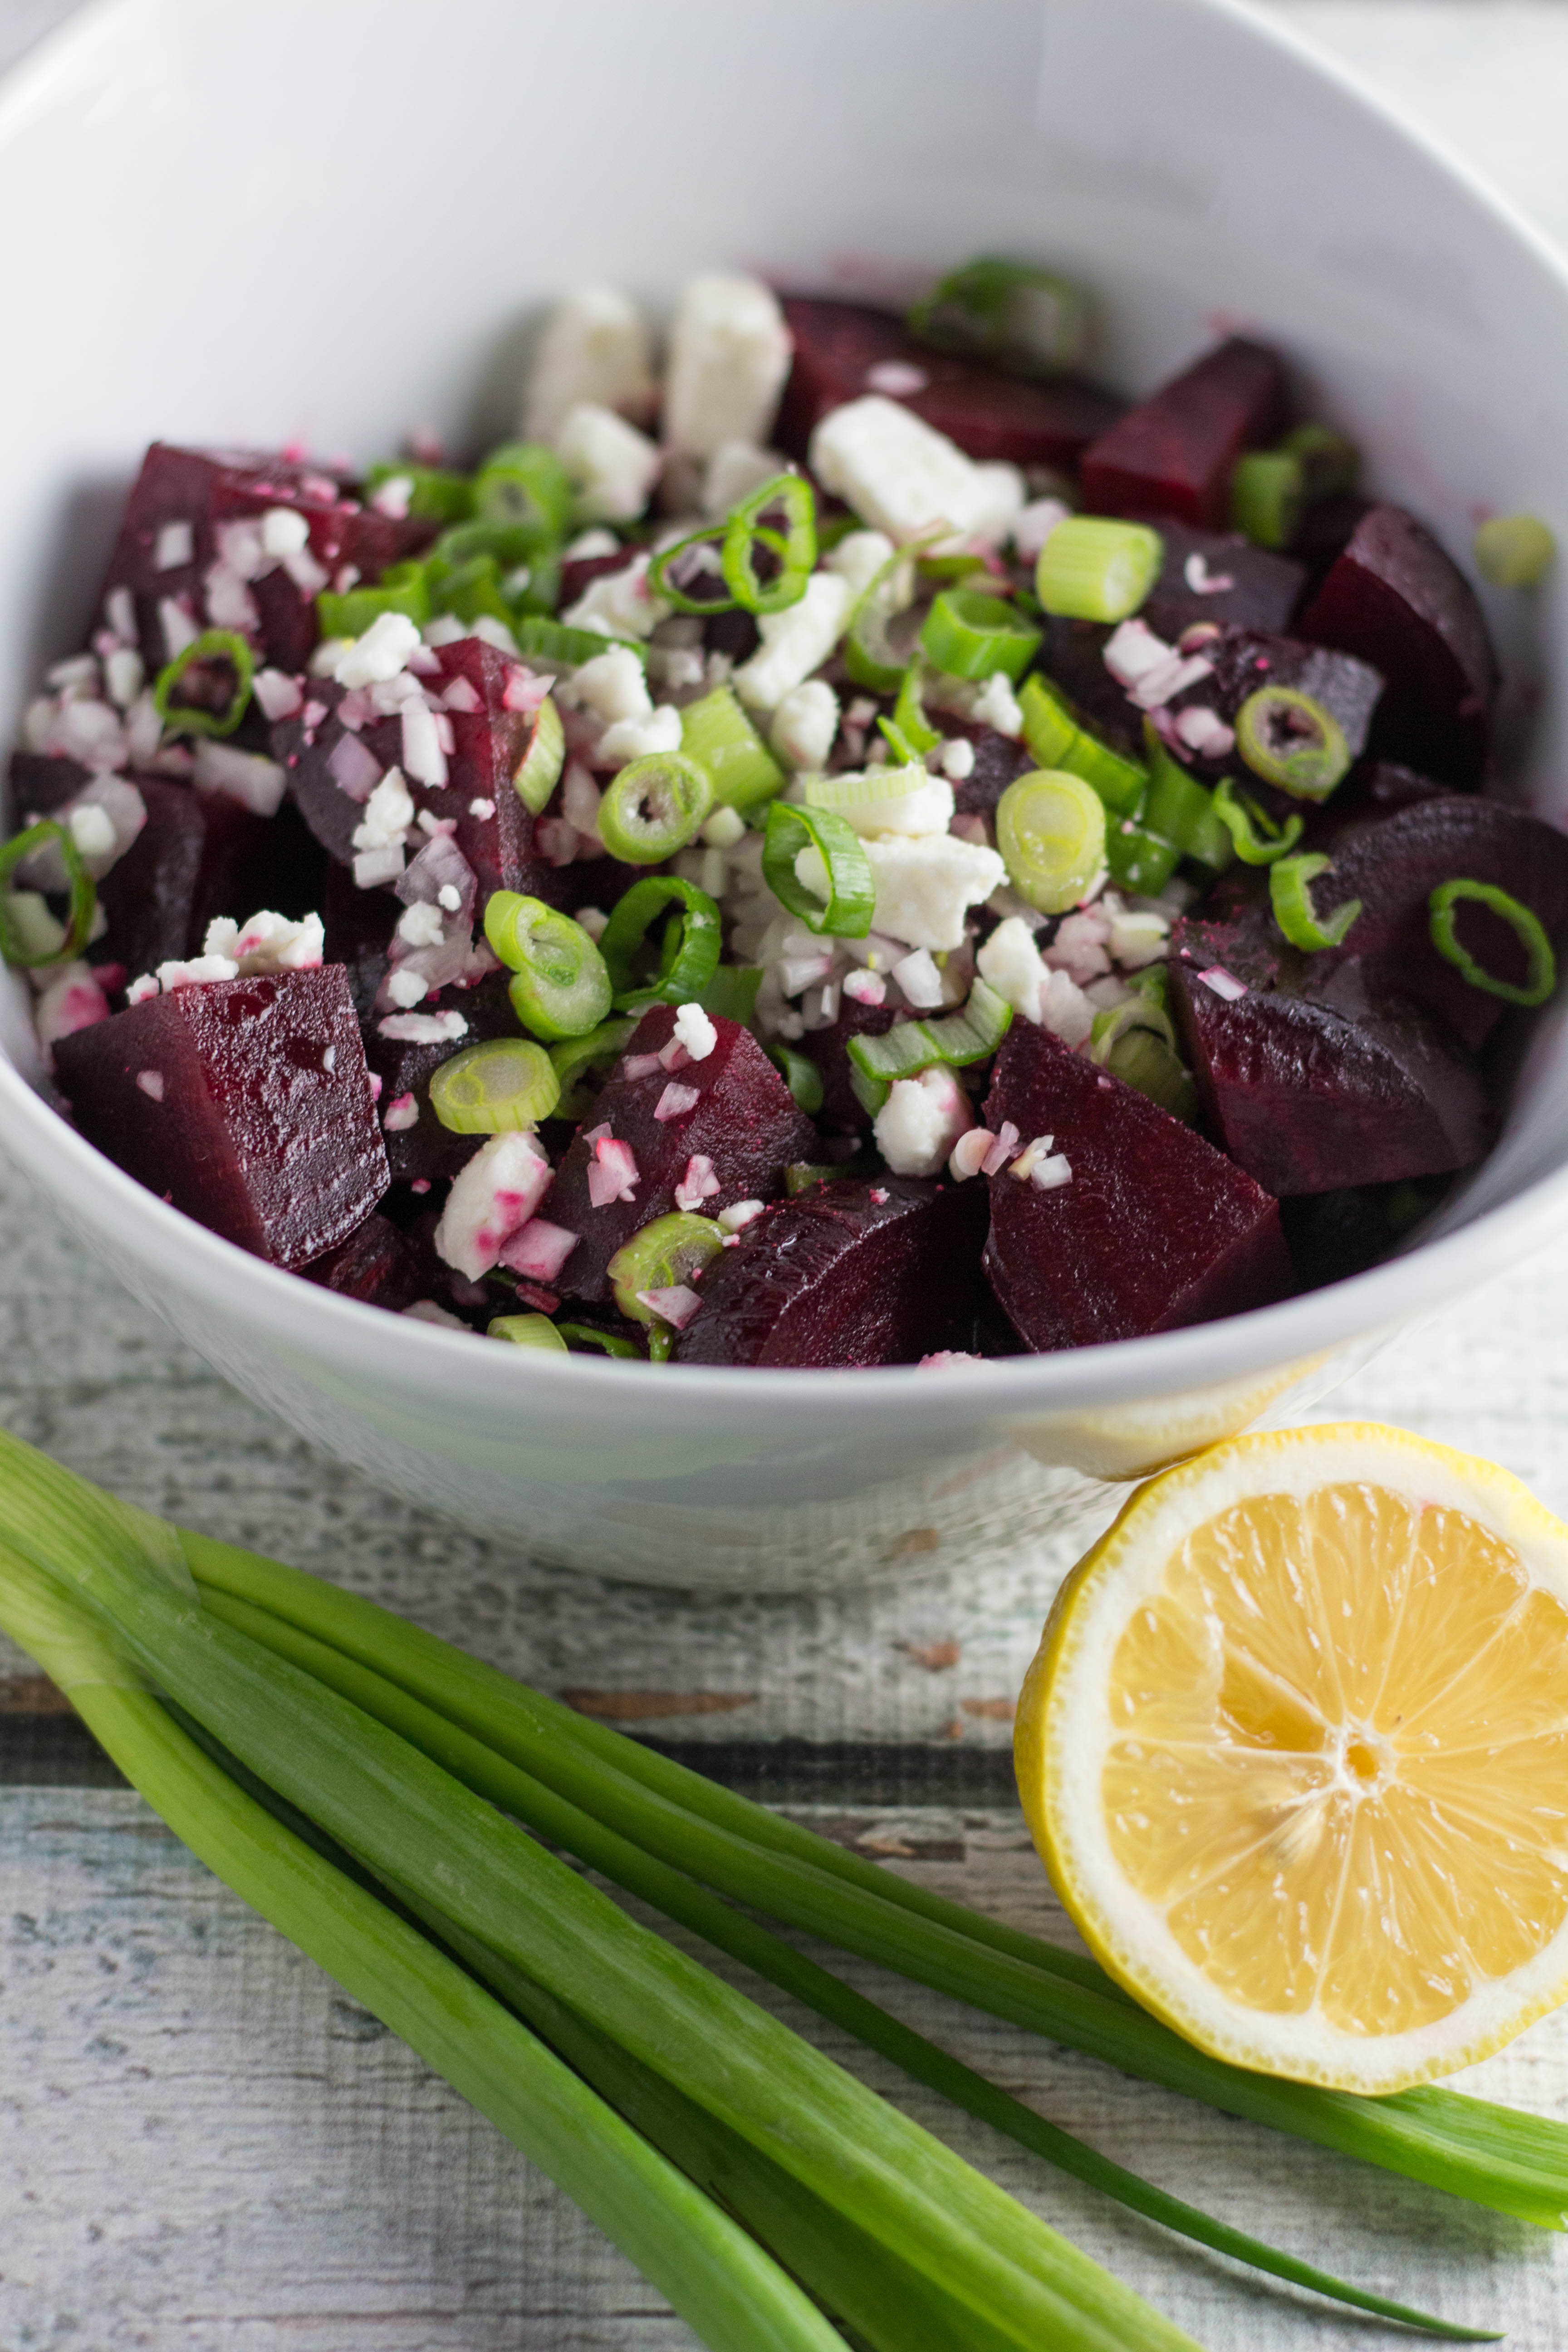 7Ingredient Roasted Beet Salad (with Feta!) Kroll's Korner - How To Make A Flavorful Beet Salad With Feta Cheese